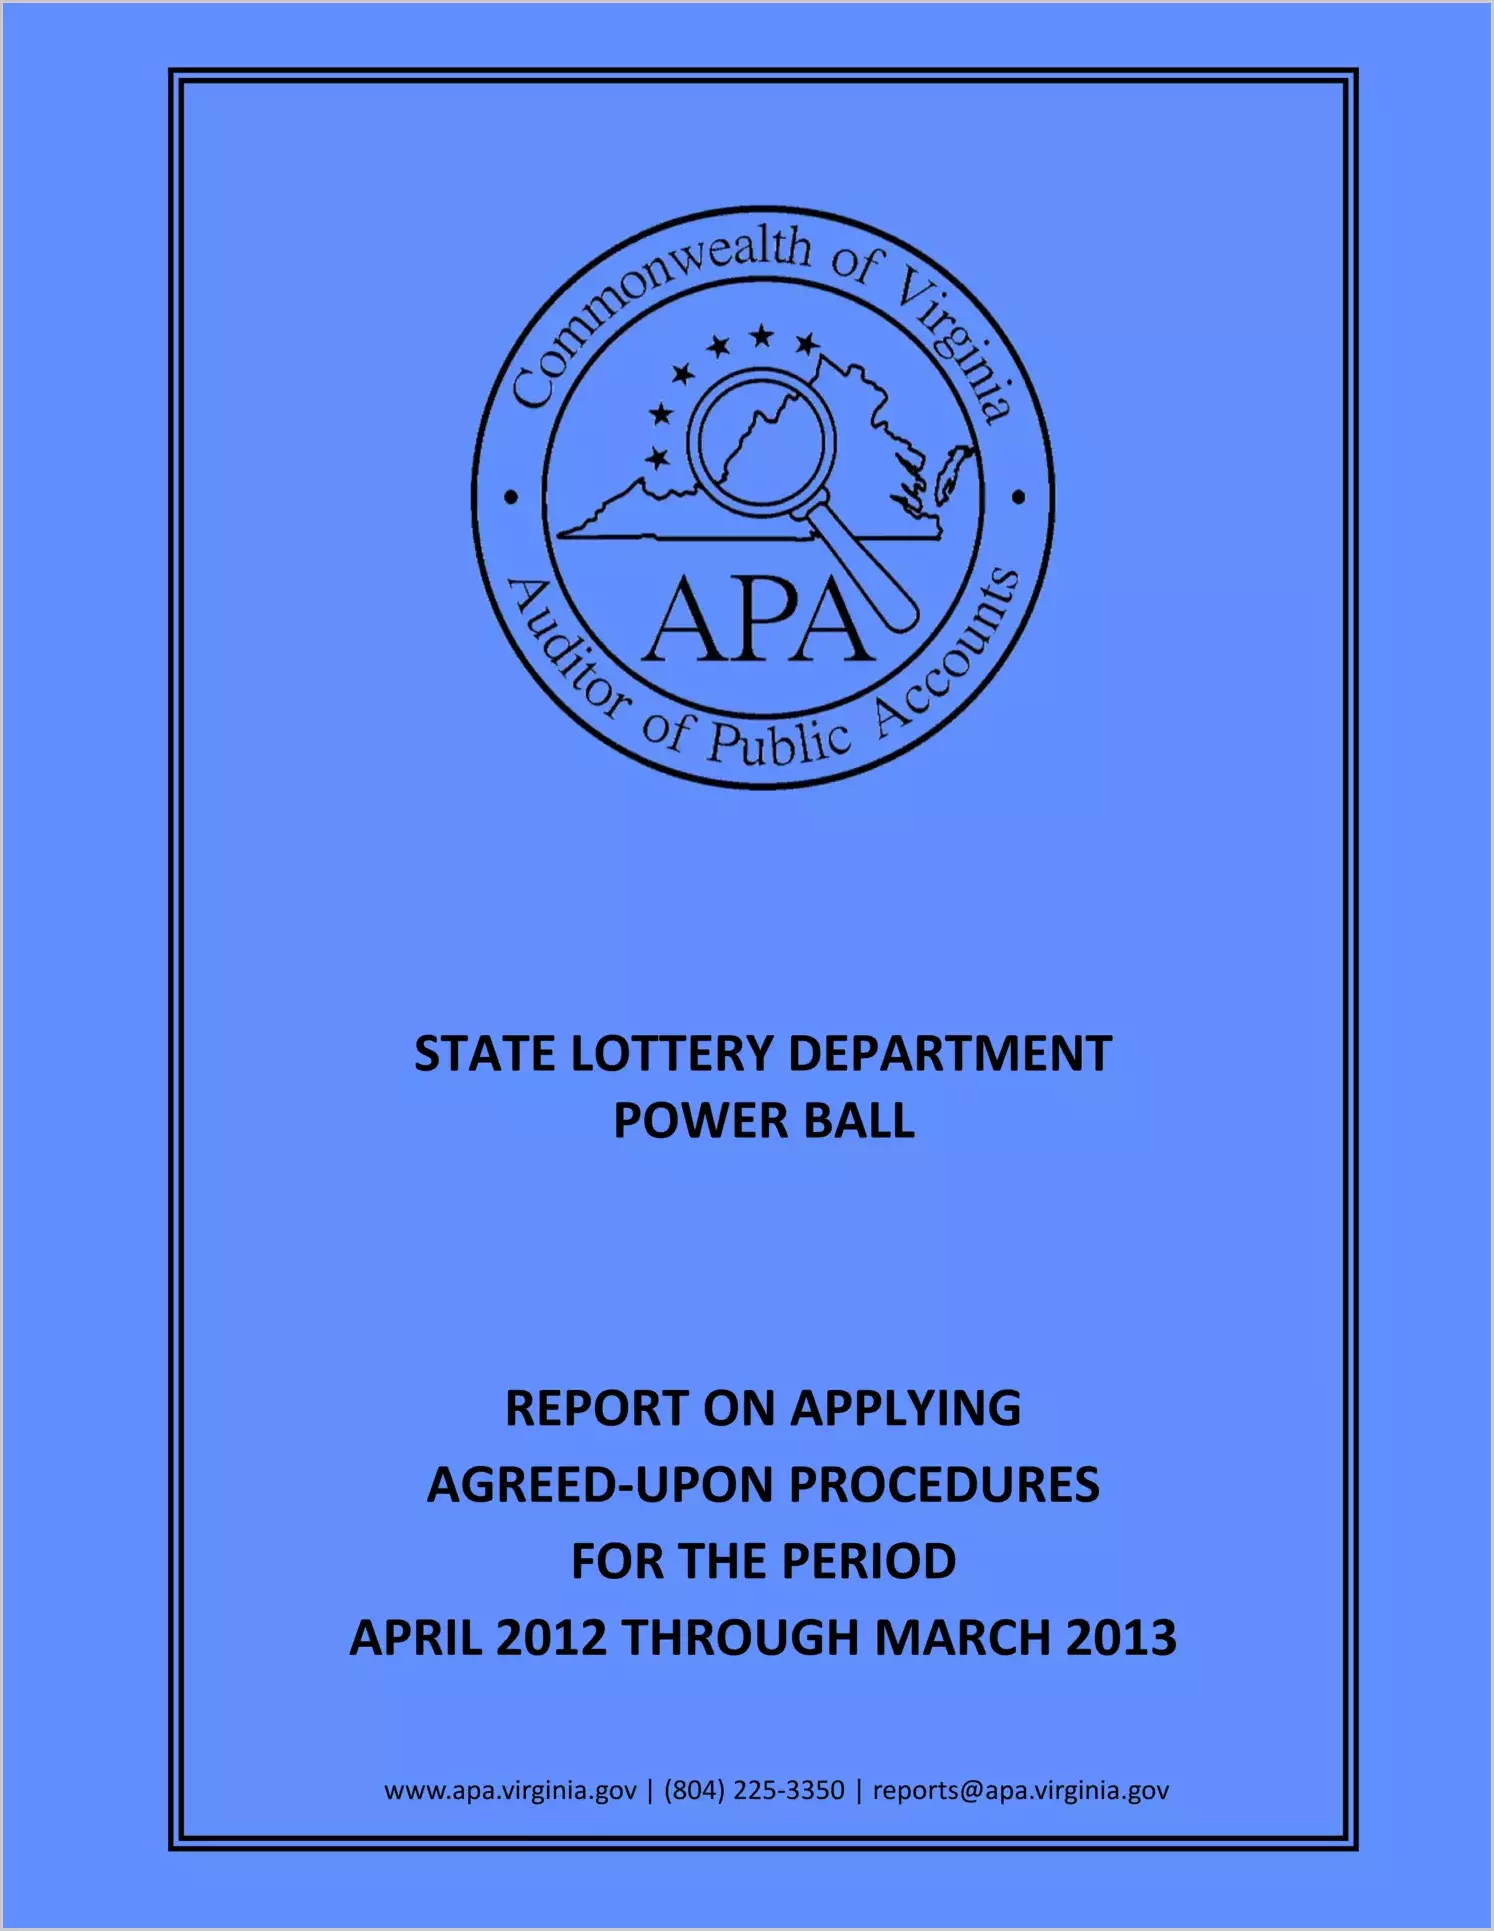 State Lottery Department Power Ball report on Applying Agreed-Upon Procedures for the period April, 2012 through March, 2013